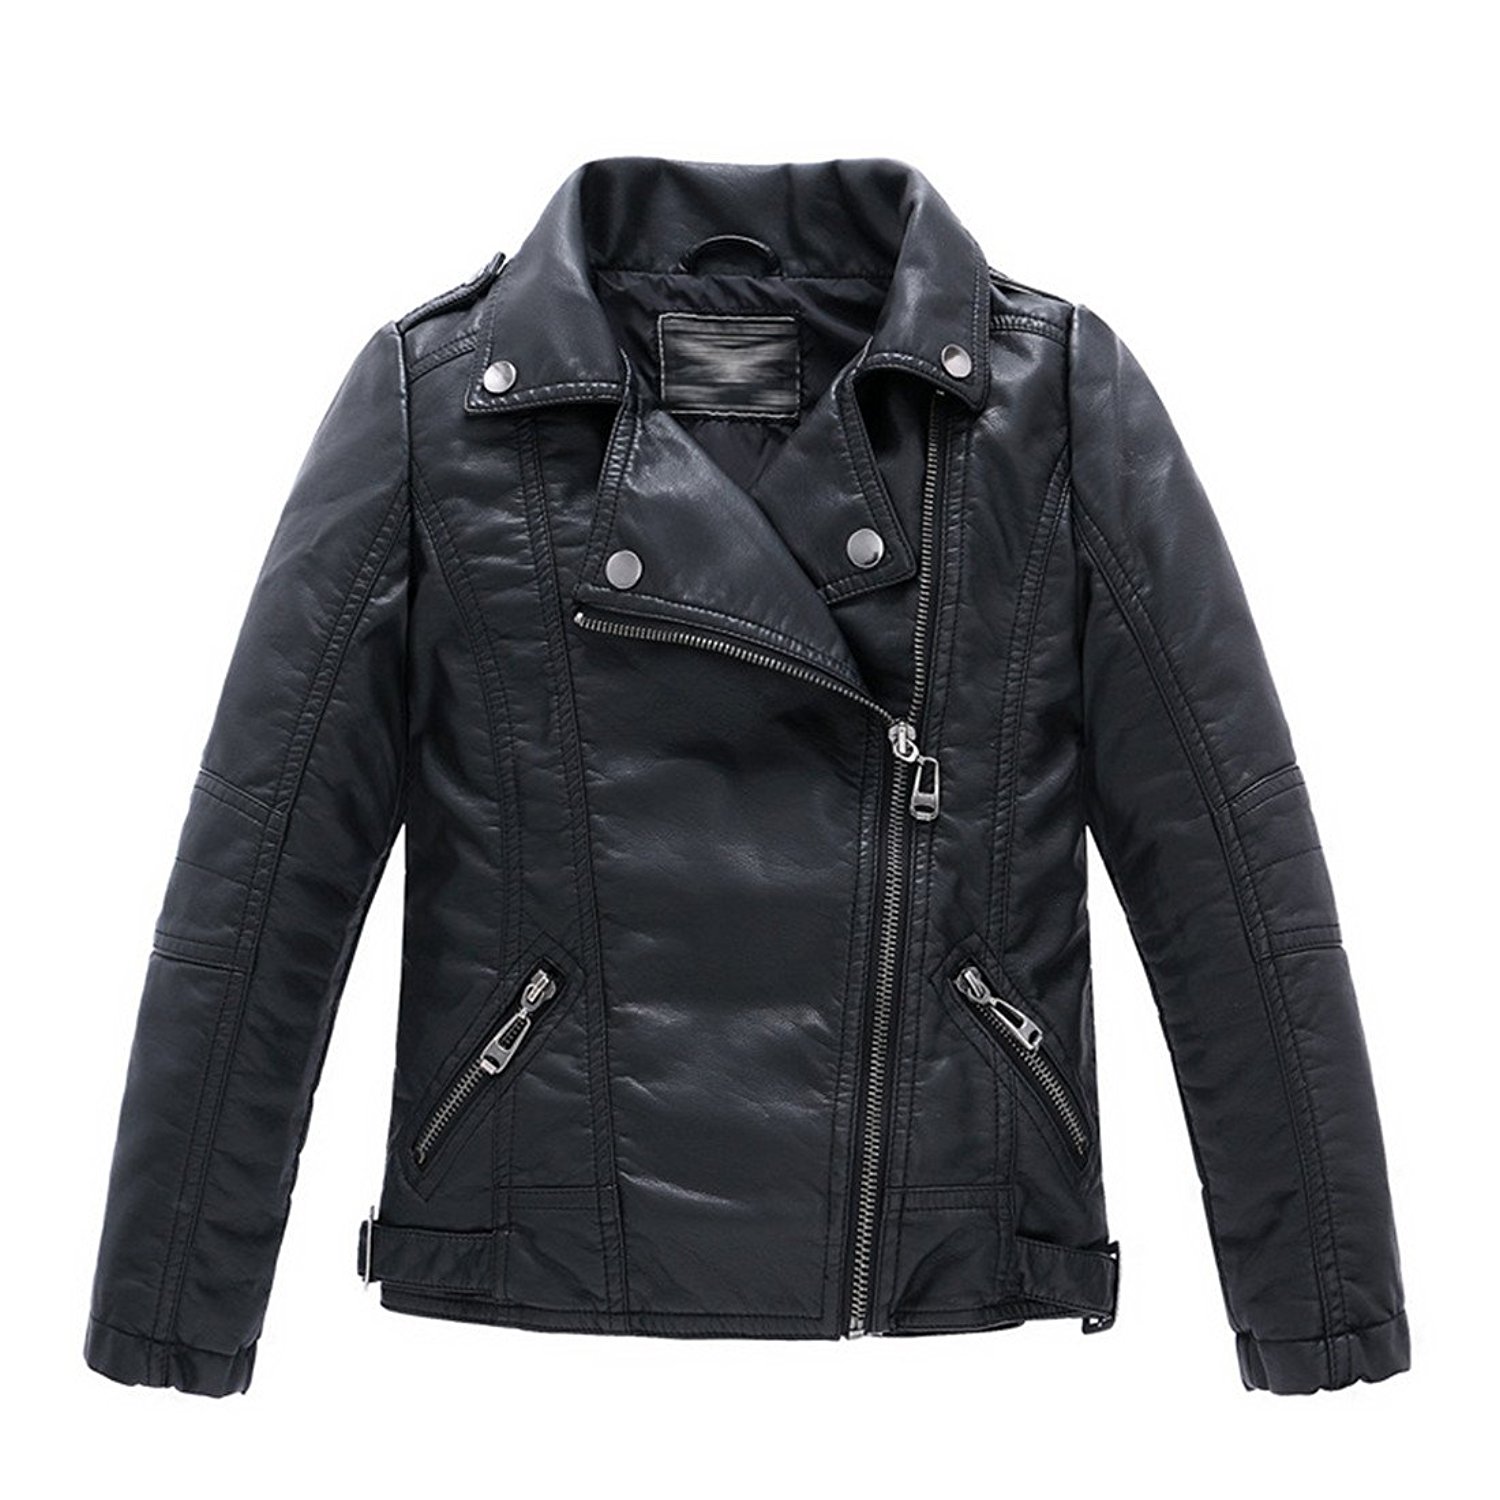 Finding the best boys jackets for
your  kids